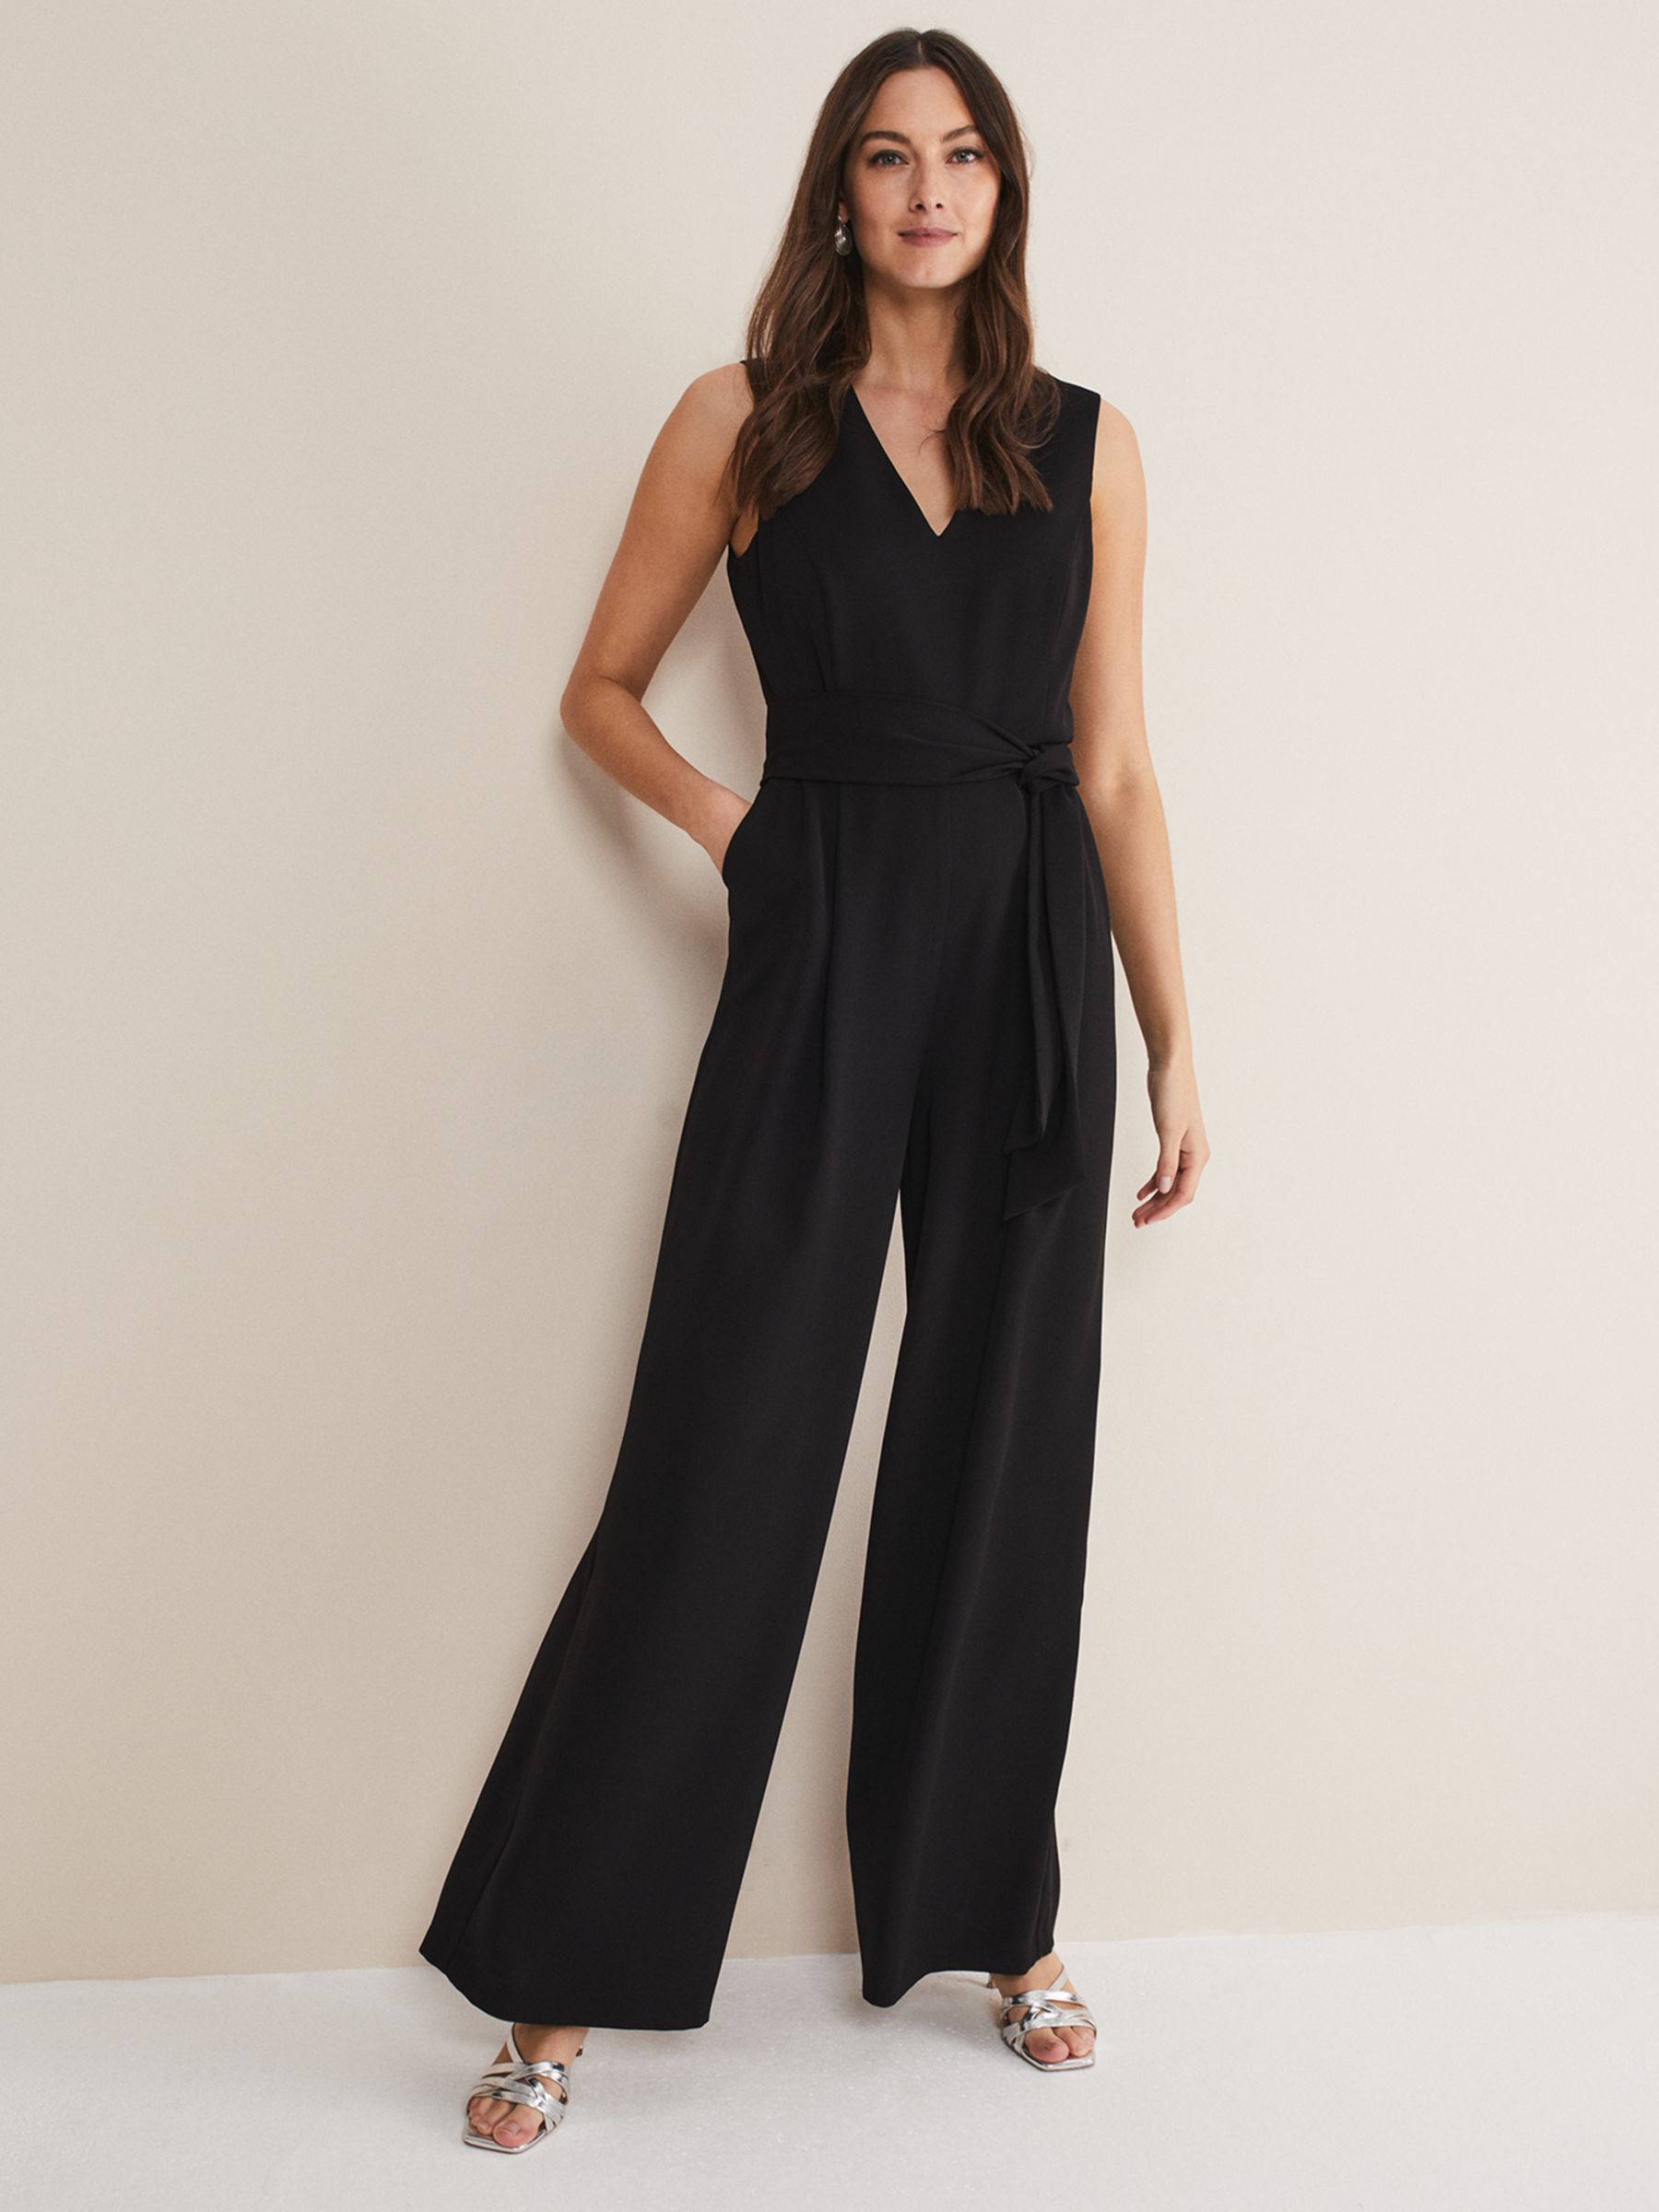 Women's Jumpsuits, Evening & Casual Jumpsuits, Phase Eight